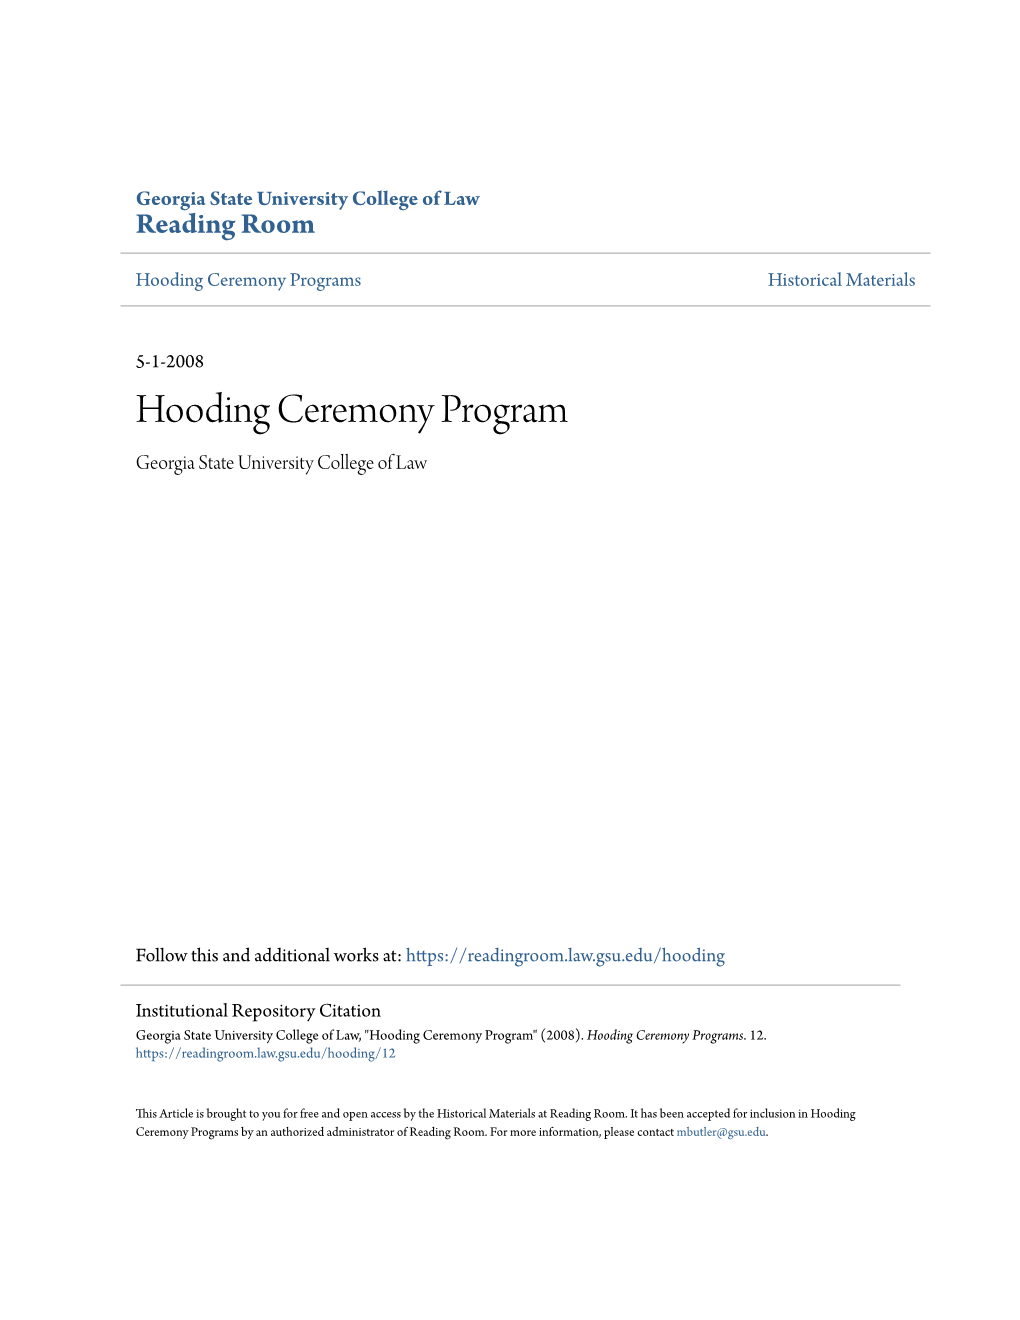 Hooding Ceremony Programs Historical Materials